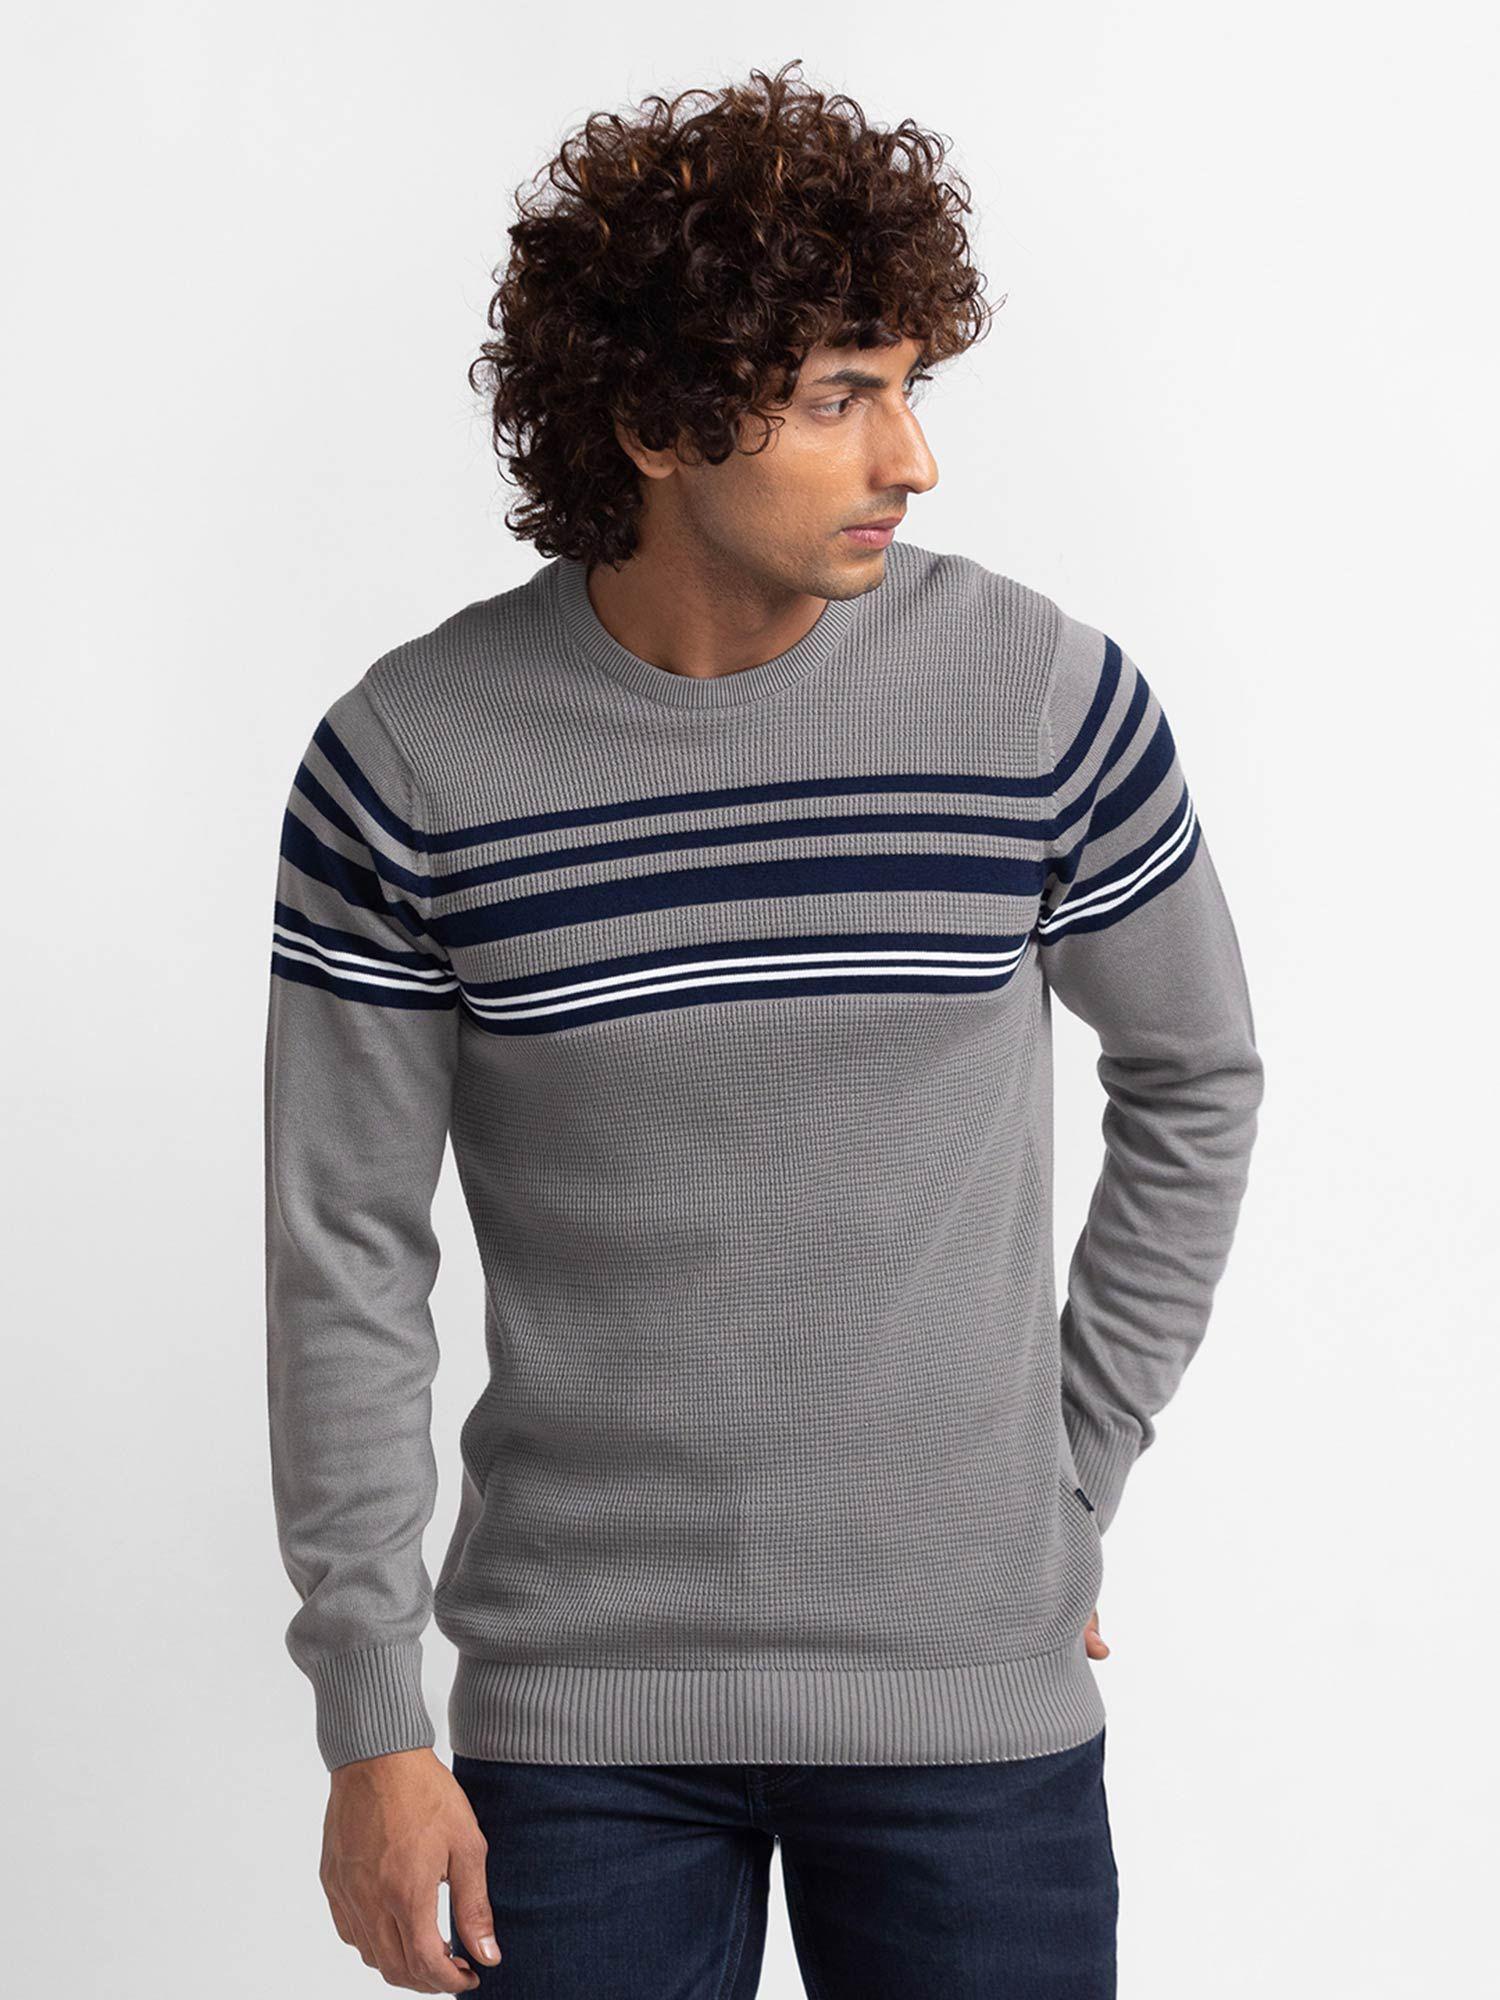 cement-grey-navy-cotton-full-sleeve-casual-sweater